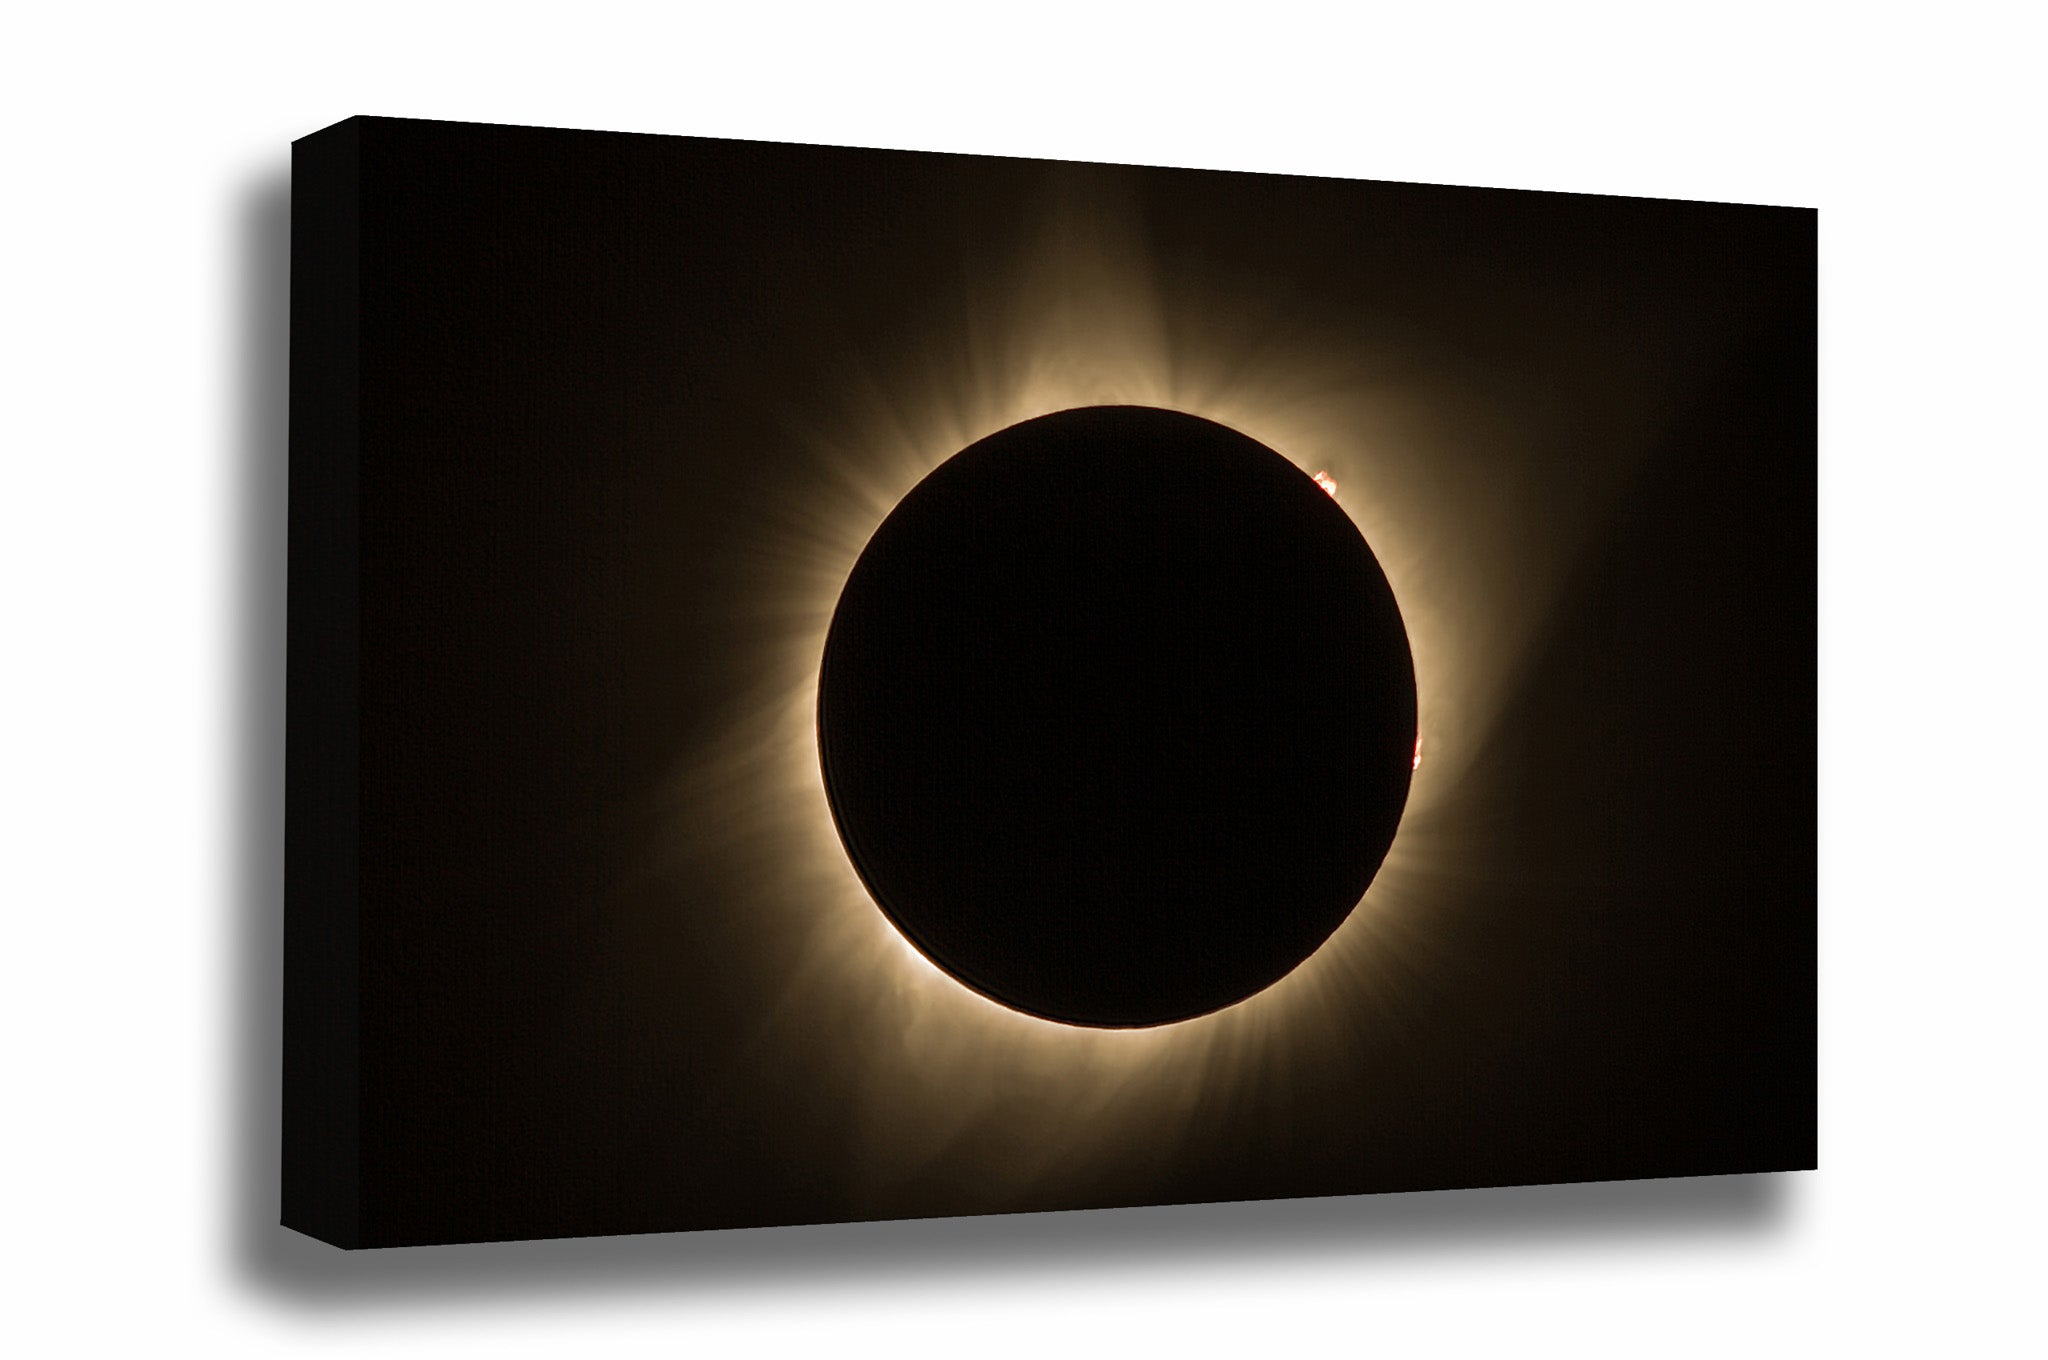 Celestial canvas wall art of a total solar eclipse with visible sun flares captured in 2017 in Nebraska by Sean Ramsey of Southern Plains Photography.